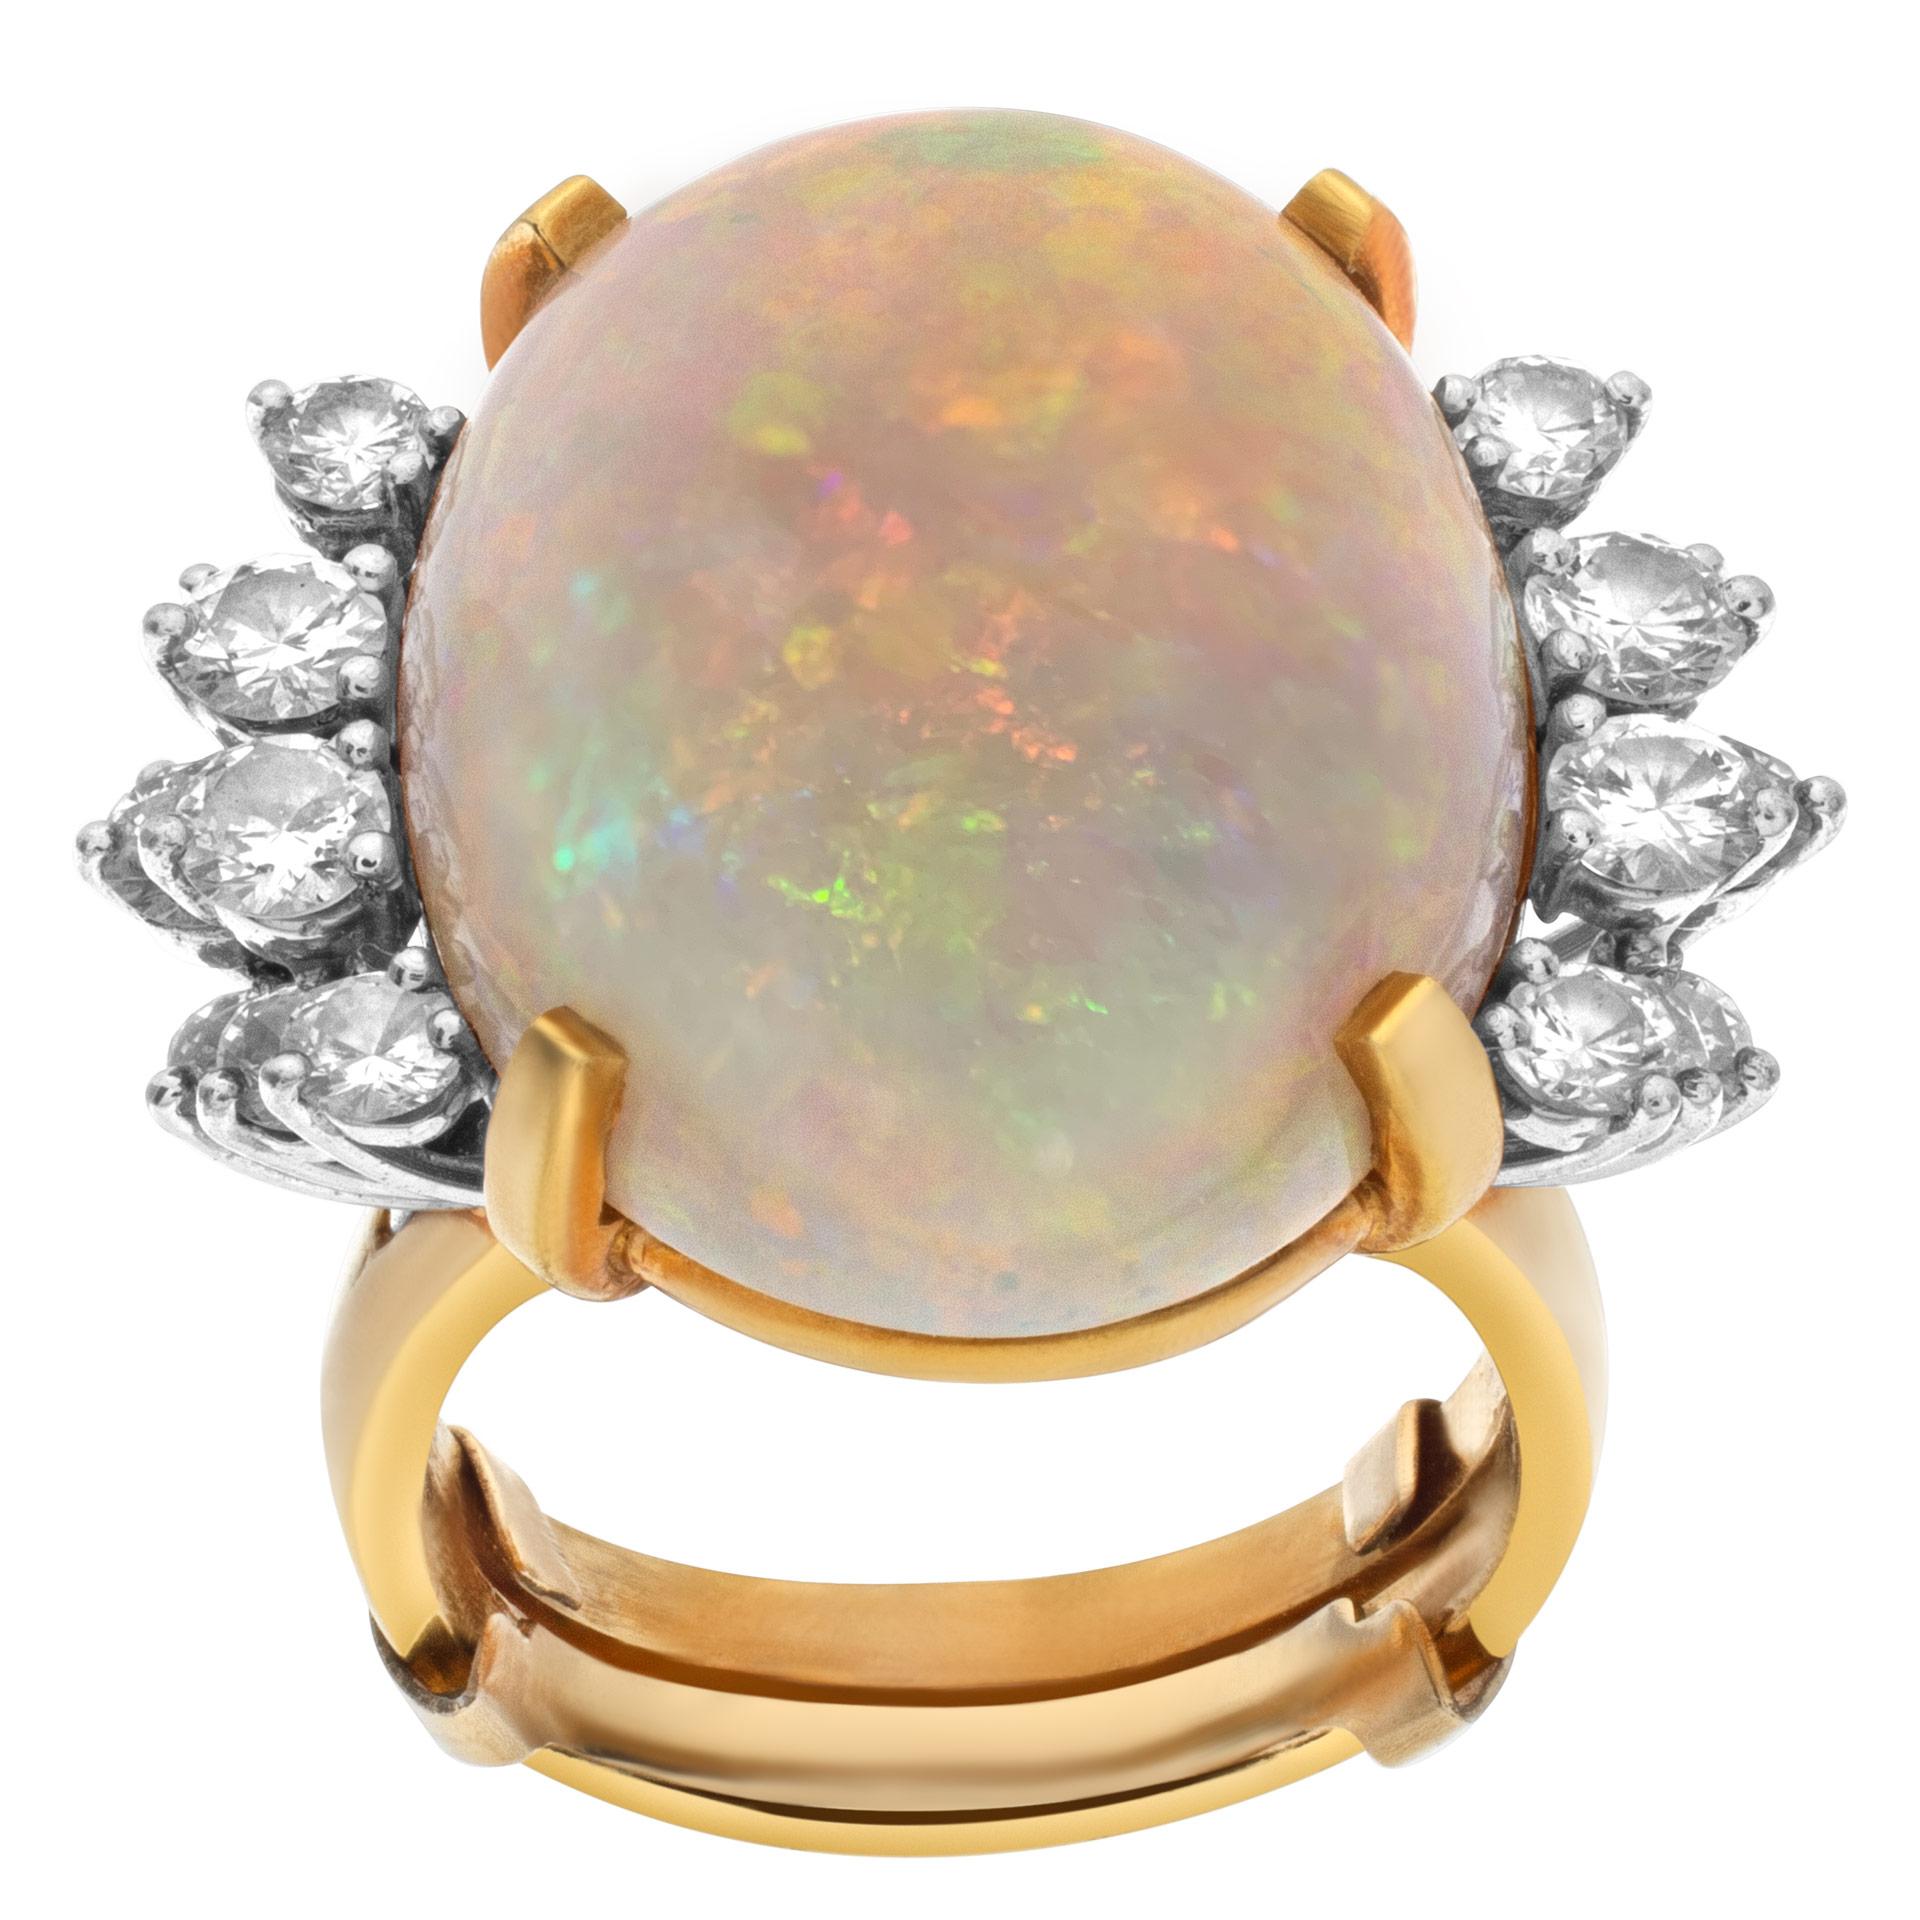 Oval Cut Australian Opal and Diamond Ring Set in 18k White and Yellow Gold